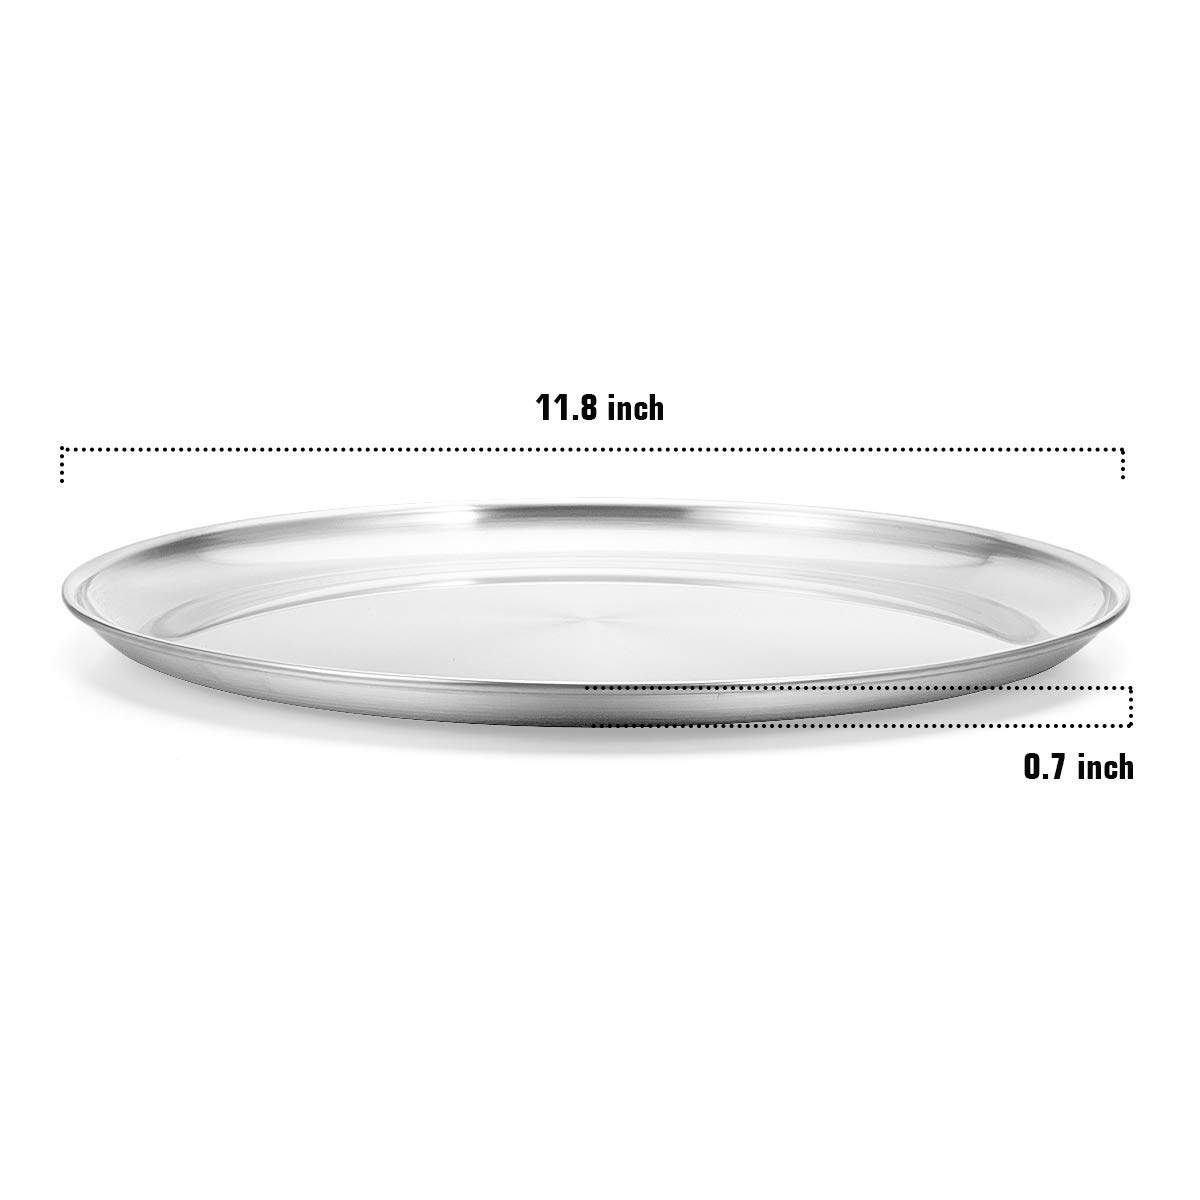 Deedro Pizza Baking Pan Pizza Tray 12 inch Stainless Steel Pizza Pan Round Pizza Baking Sheet Oven Tray Pizza Crisper Pan, Healthy Pizza Cooking Pan for Oven, 2 Pack